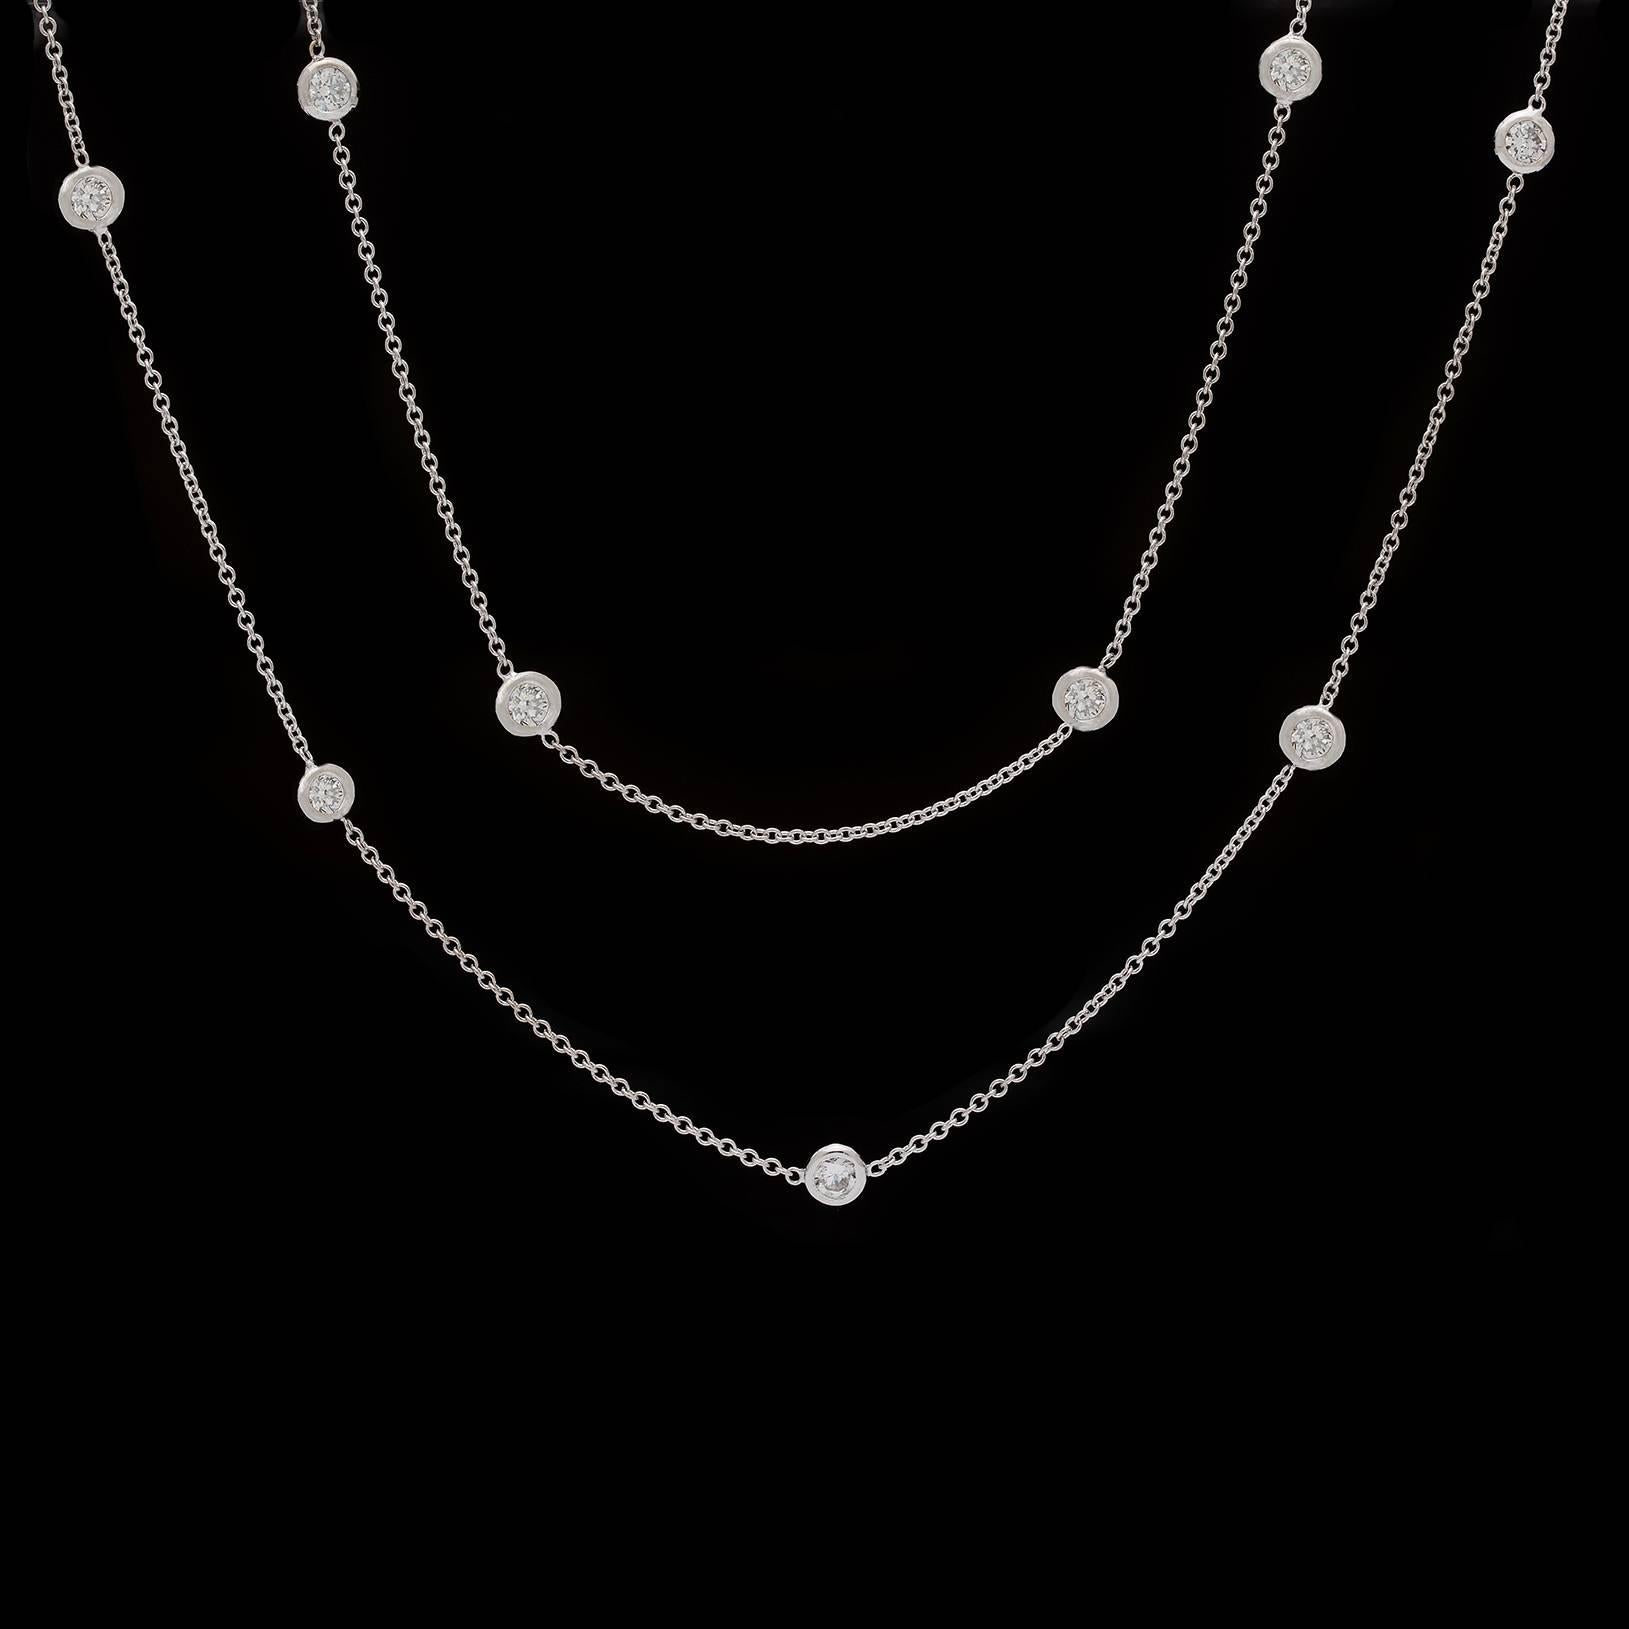 36 inch long diamond by the yard necklace in 18k white gold with 18 diamonds totaling 4.50cttw.  The round brilliant cut H-J/VS-SI diamonds are bezel set and stationed on a thin white gold chain.  This is a very versatile piece with a lot of style.